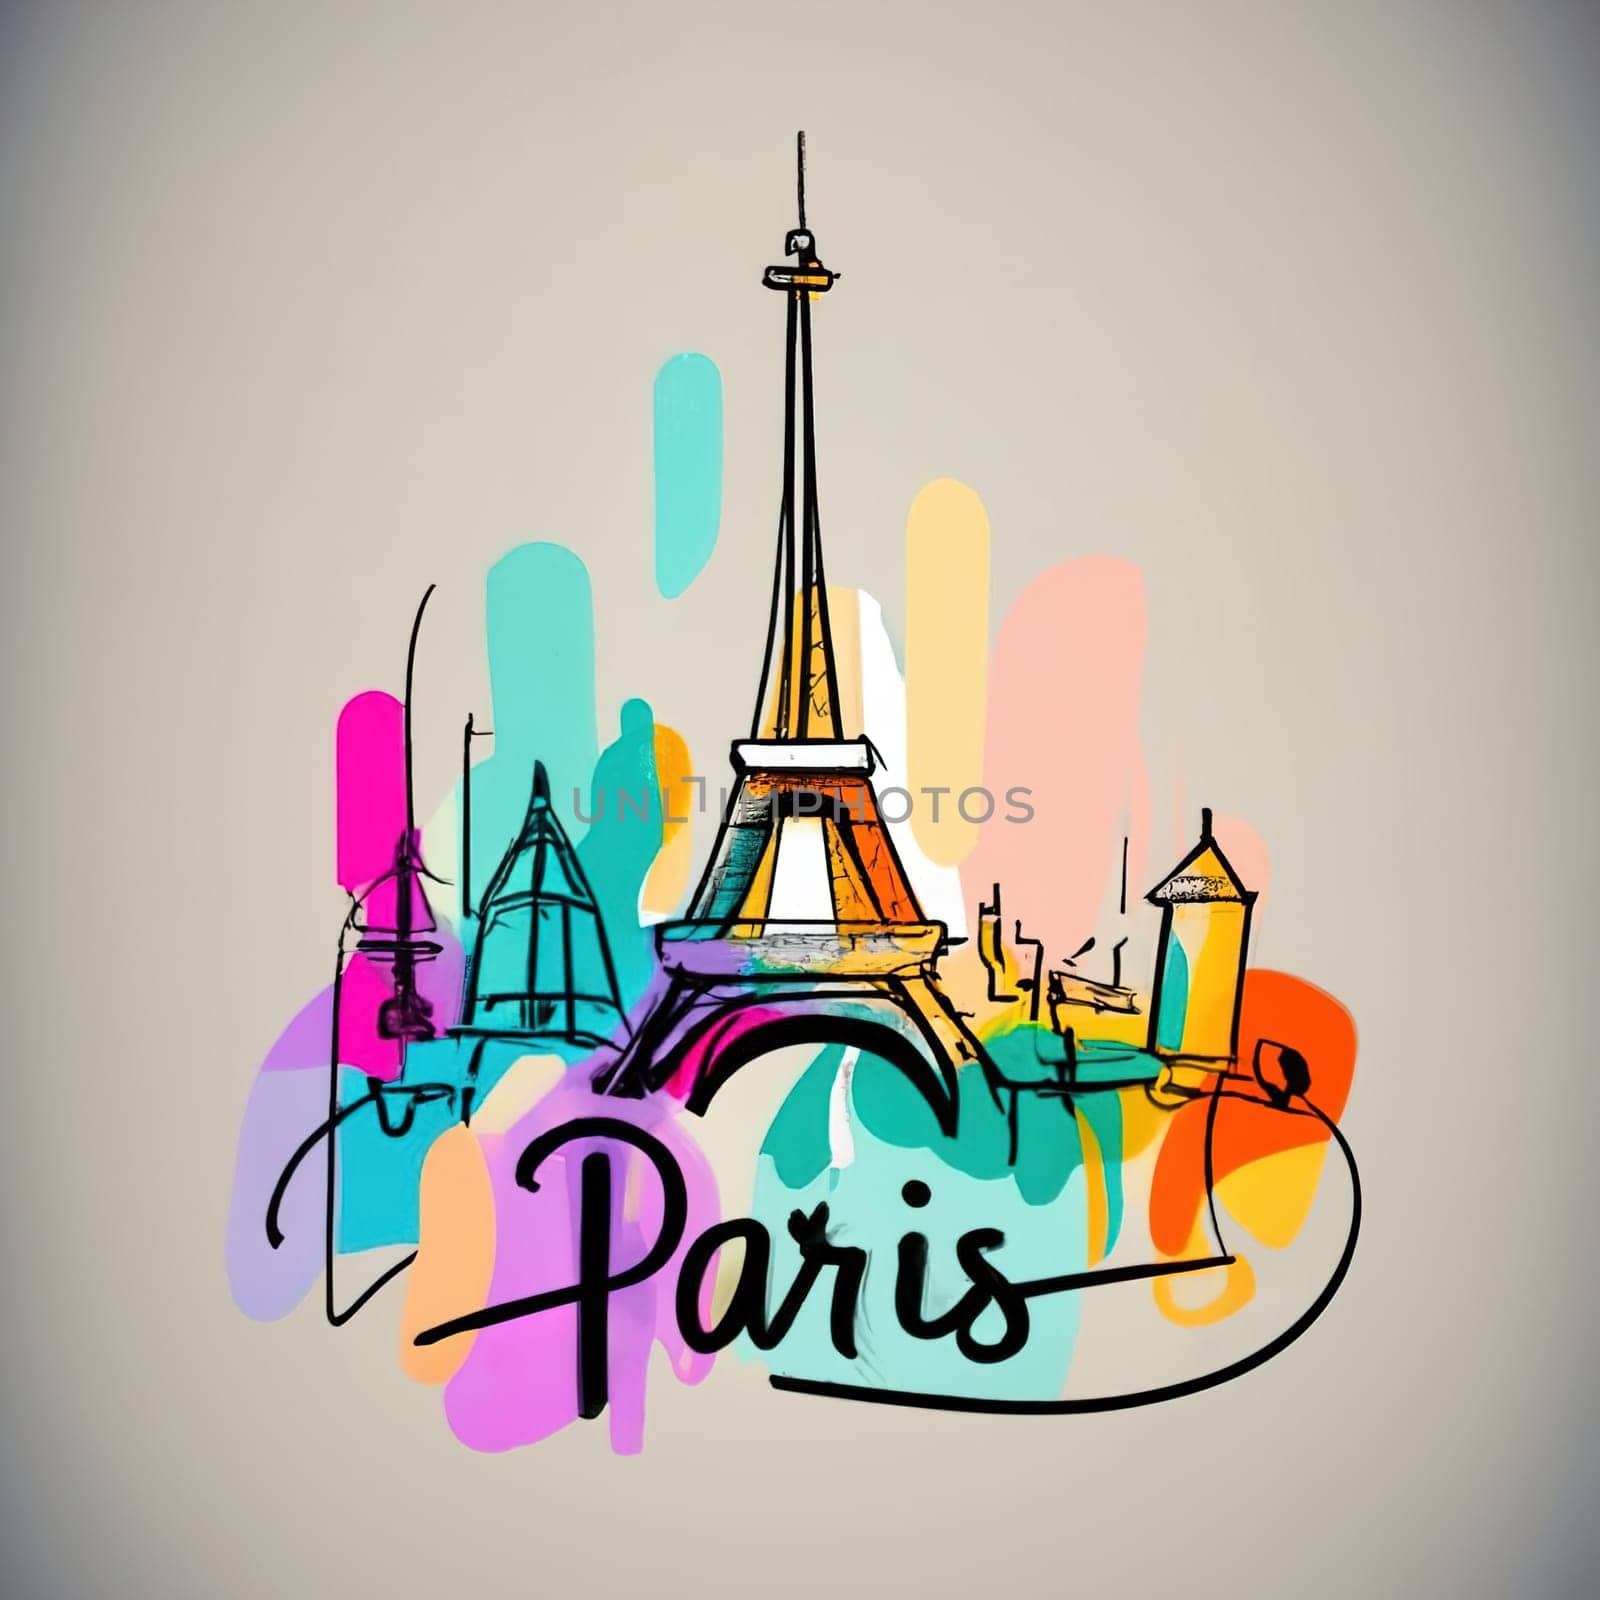 Minimalist Continuous Line Drawing of Paris and Eiffel Tower - Unique Typography Art by igor010